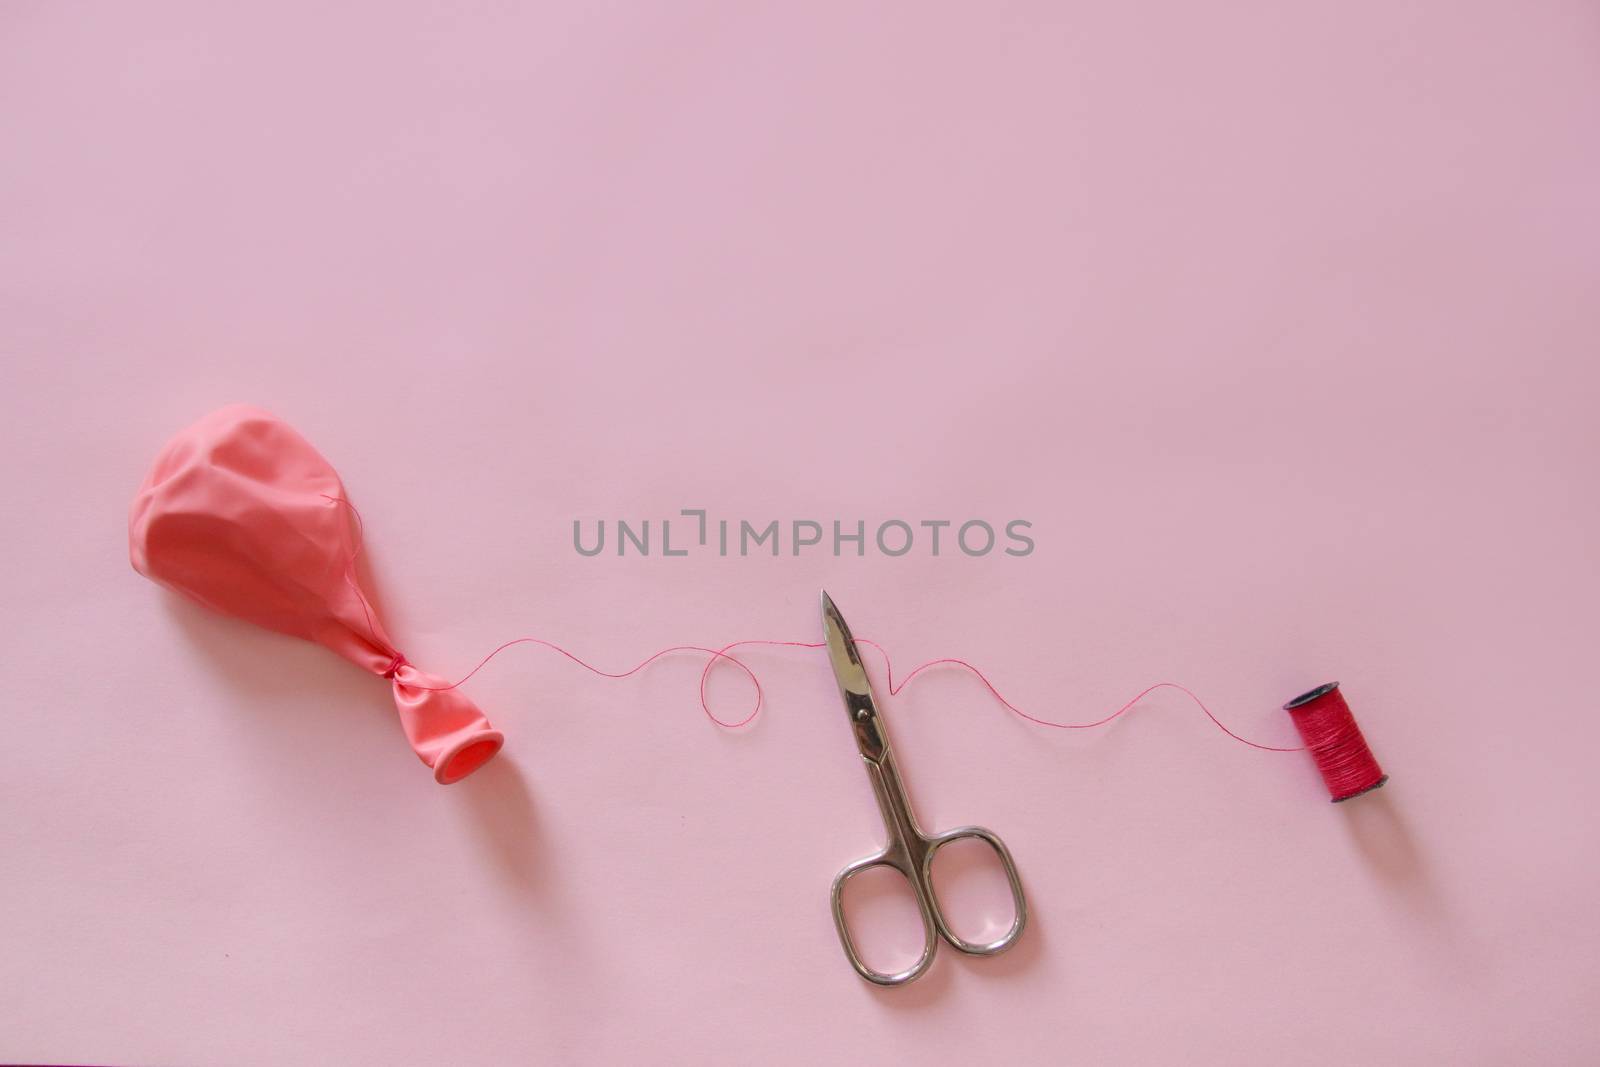 Plastic Balloon and Scissors showing concept of Plastic Use Reduction